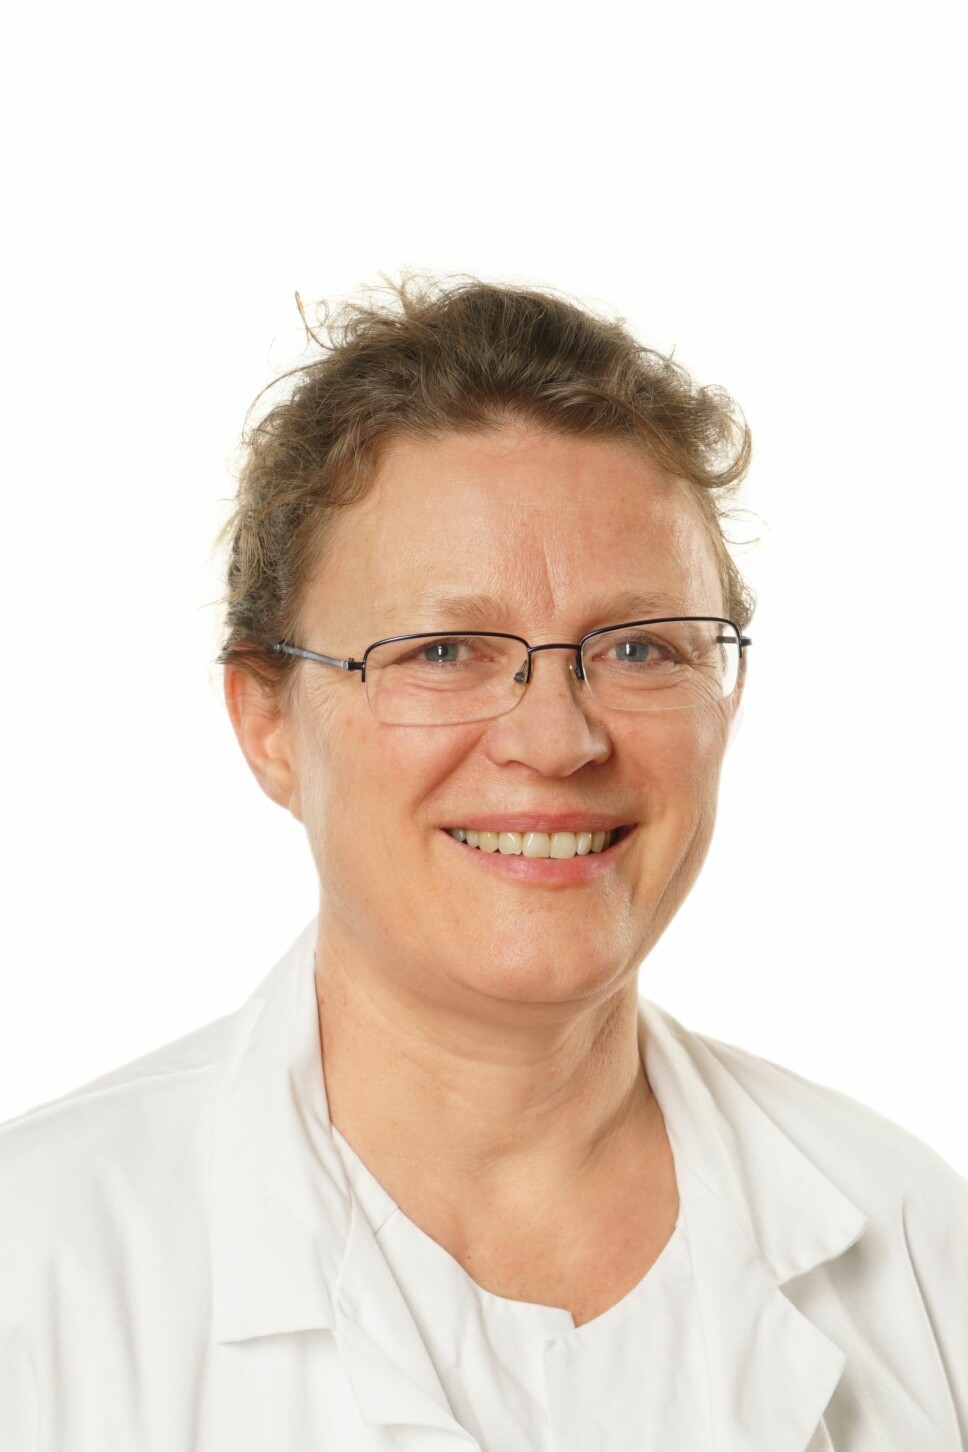 Åslaug Helland is oncologist and leader of the lung cancer research group at OUH.